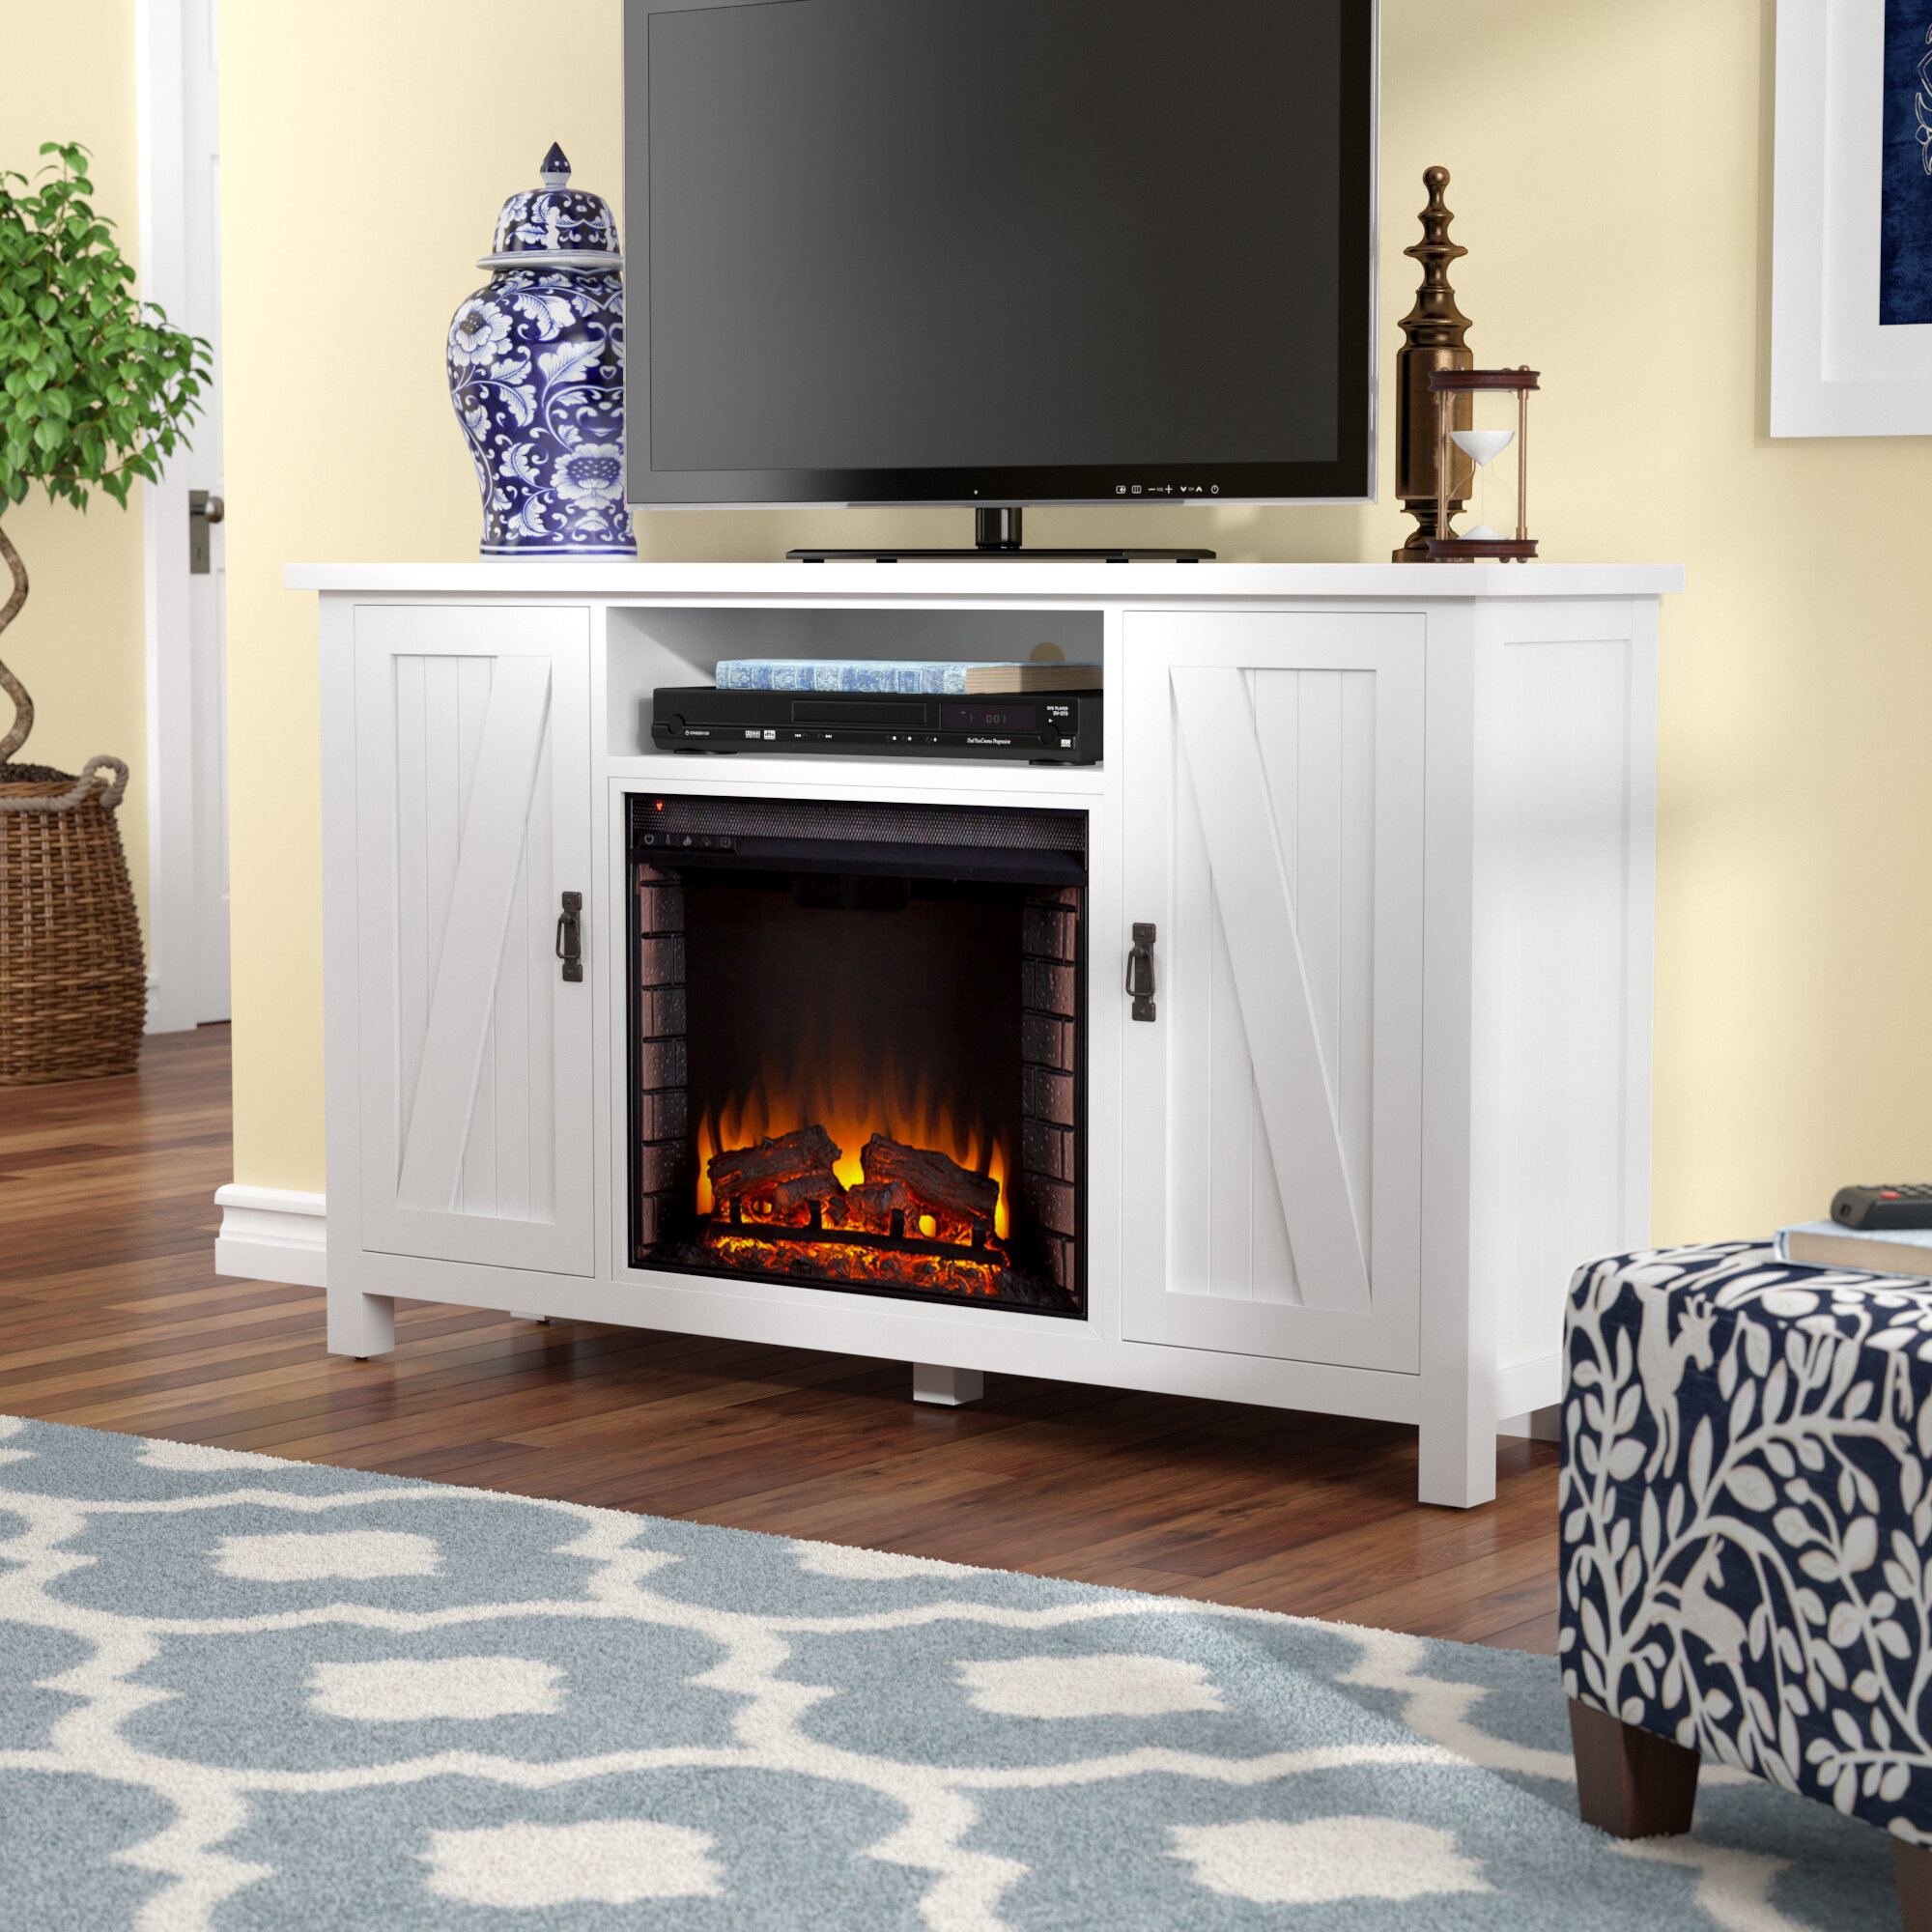 Boyer TV Stand for TVs up to 65" with Fireplace Included